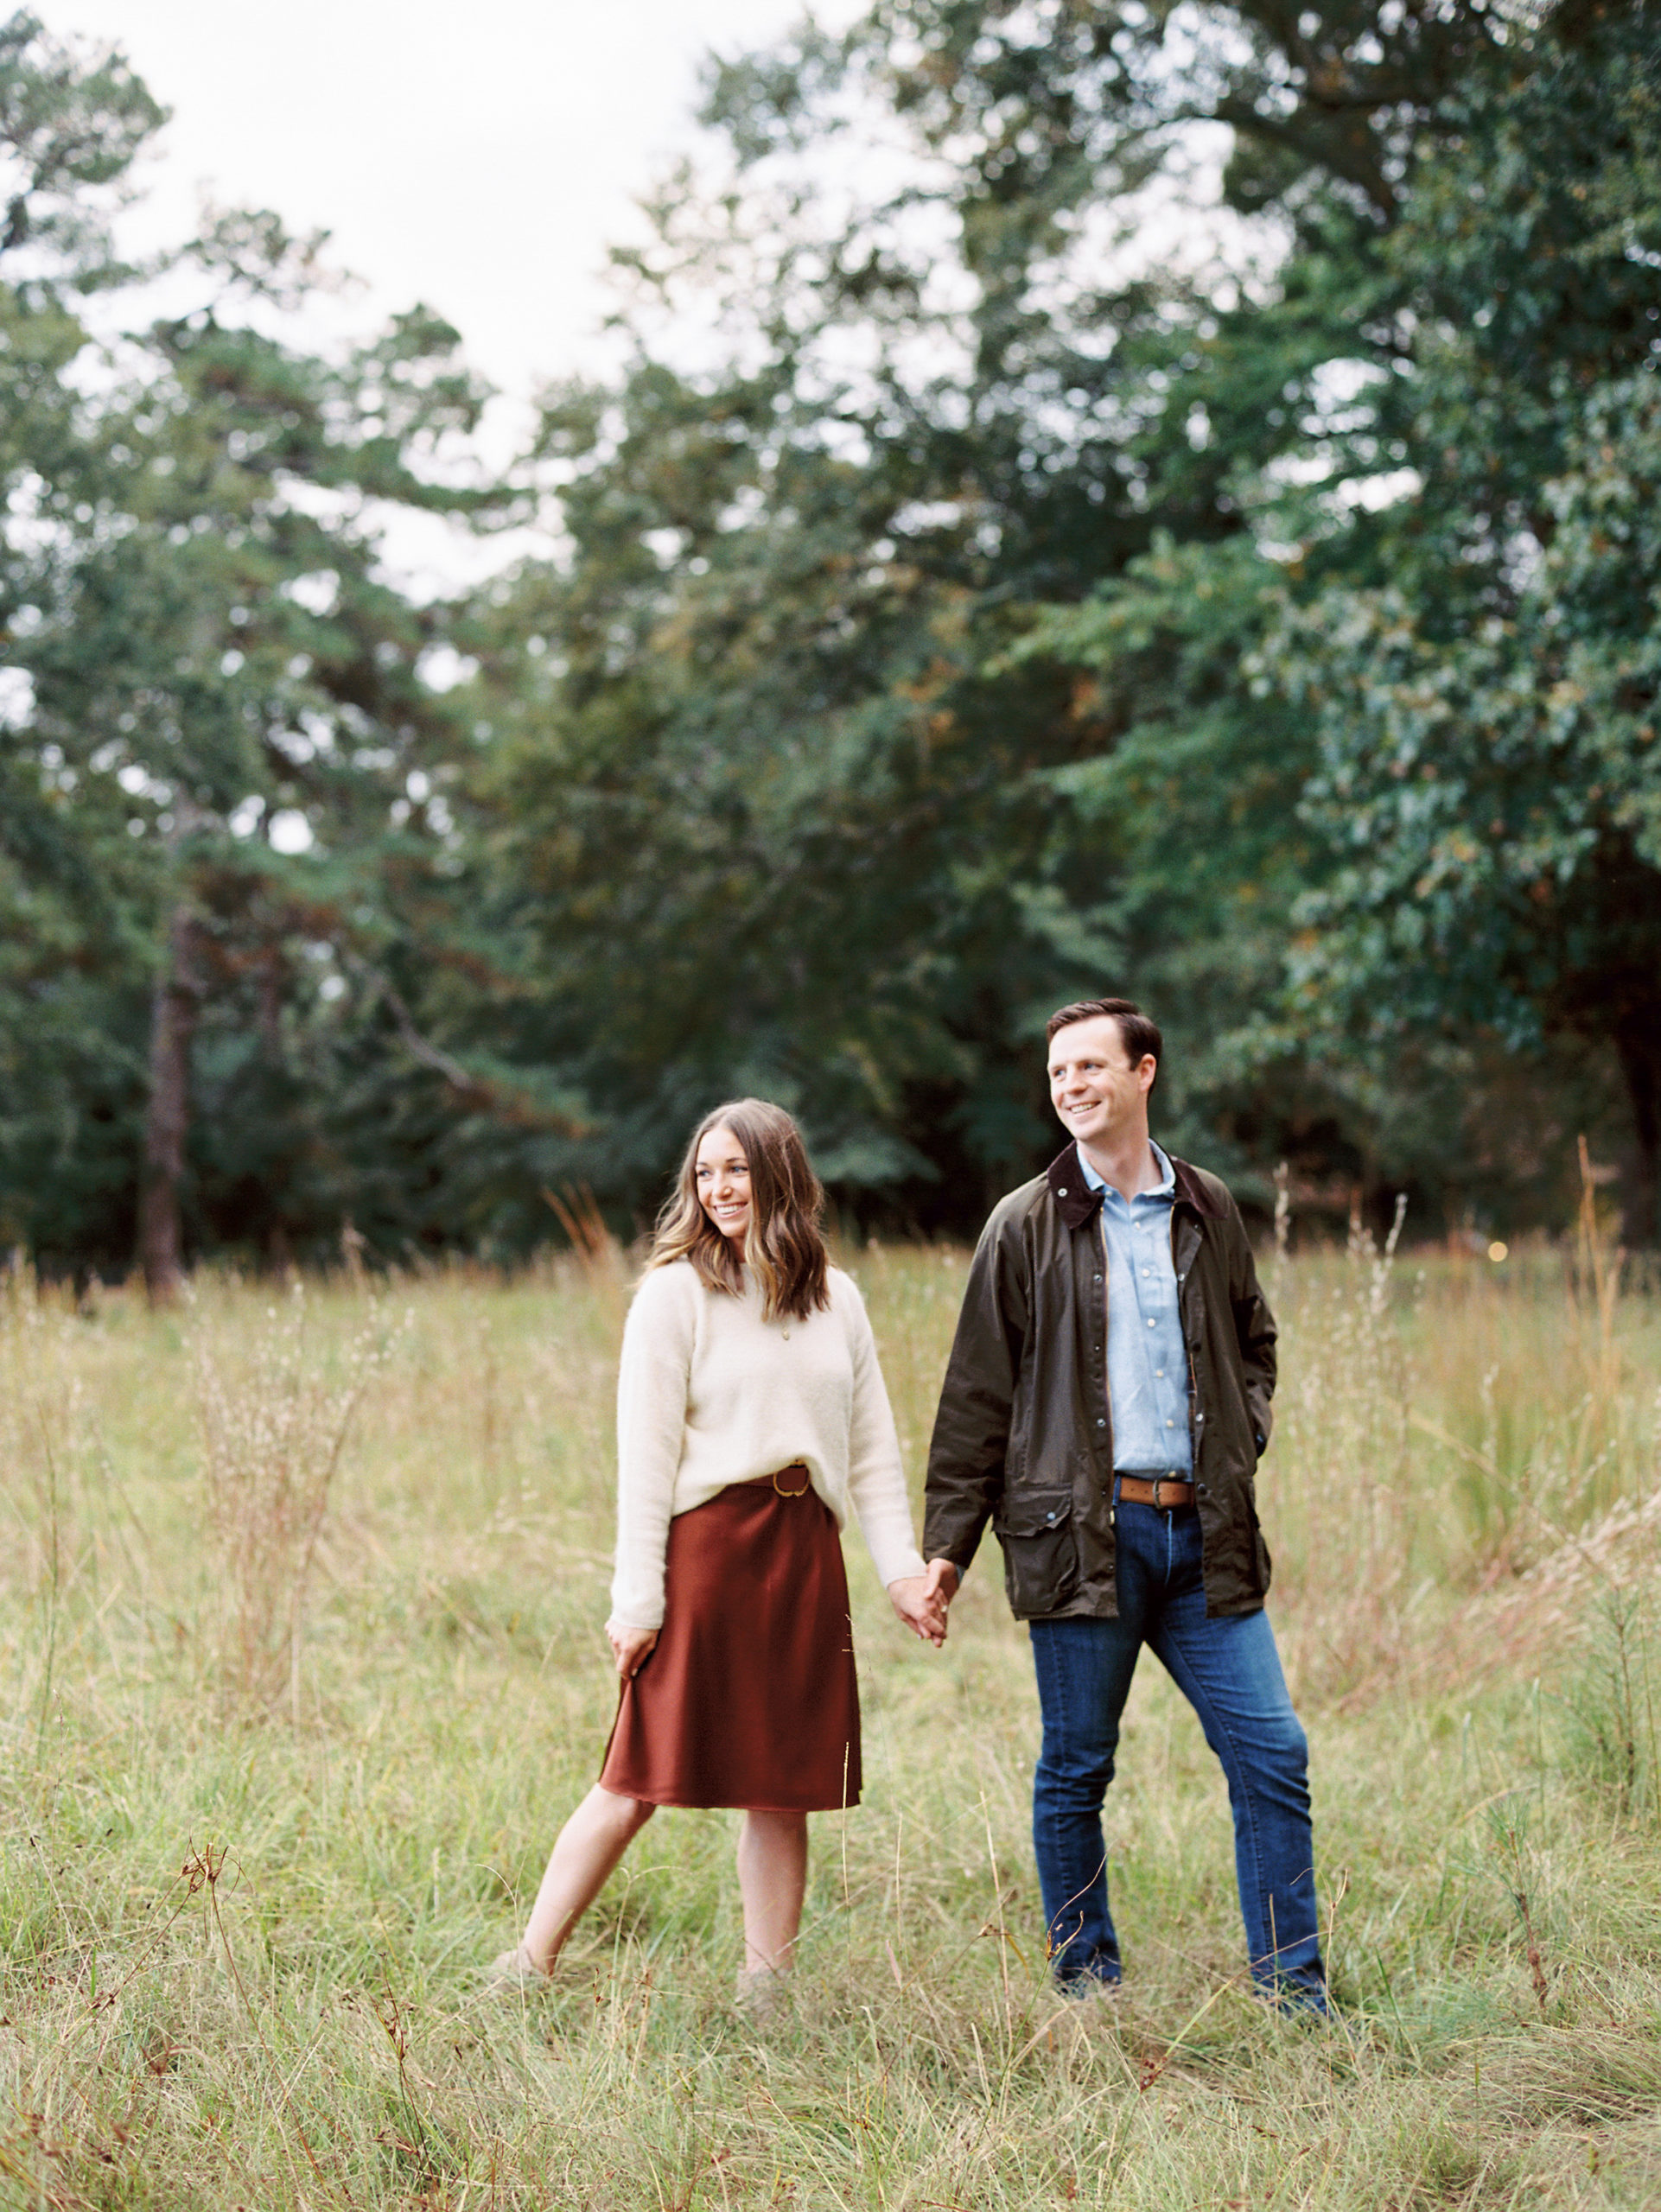 Engagement Session  at Weymouth Center in Pinehurst, NC